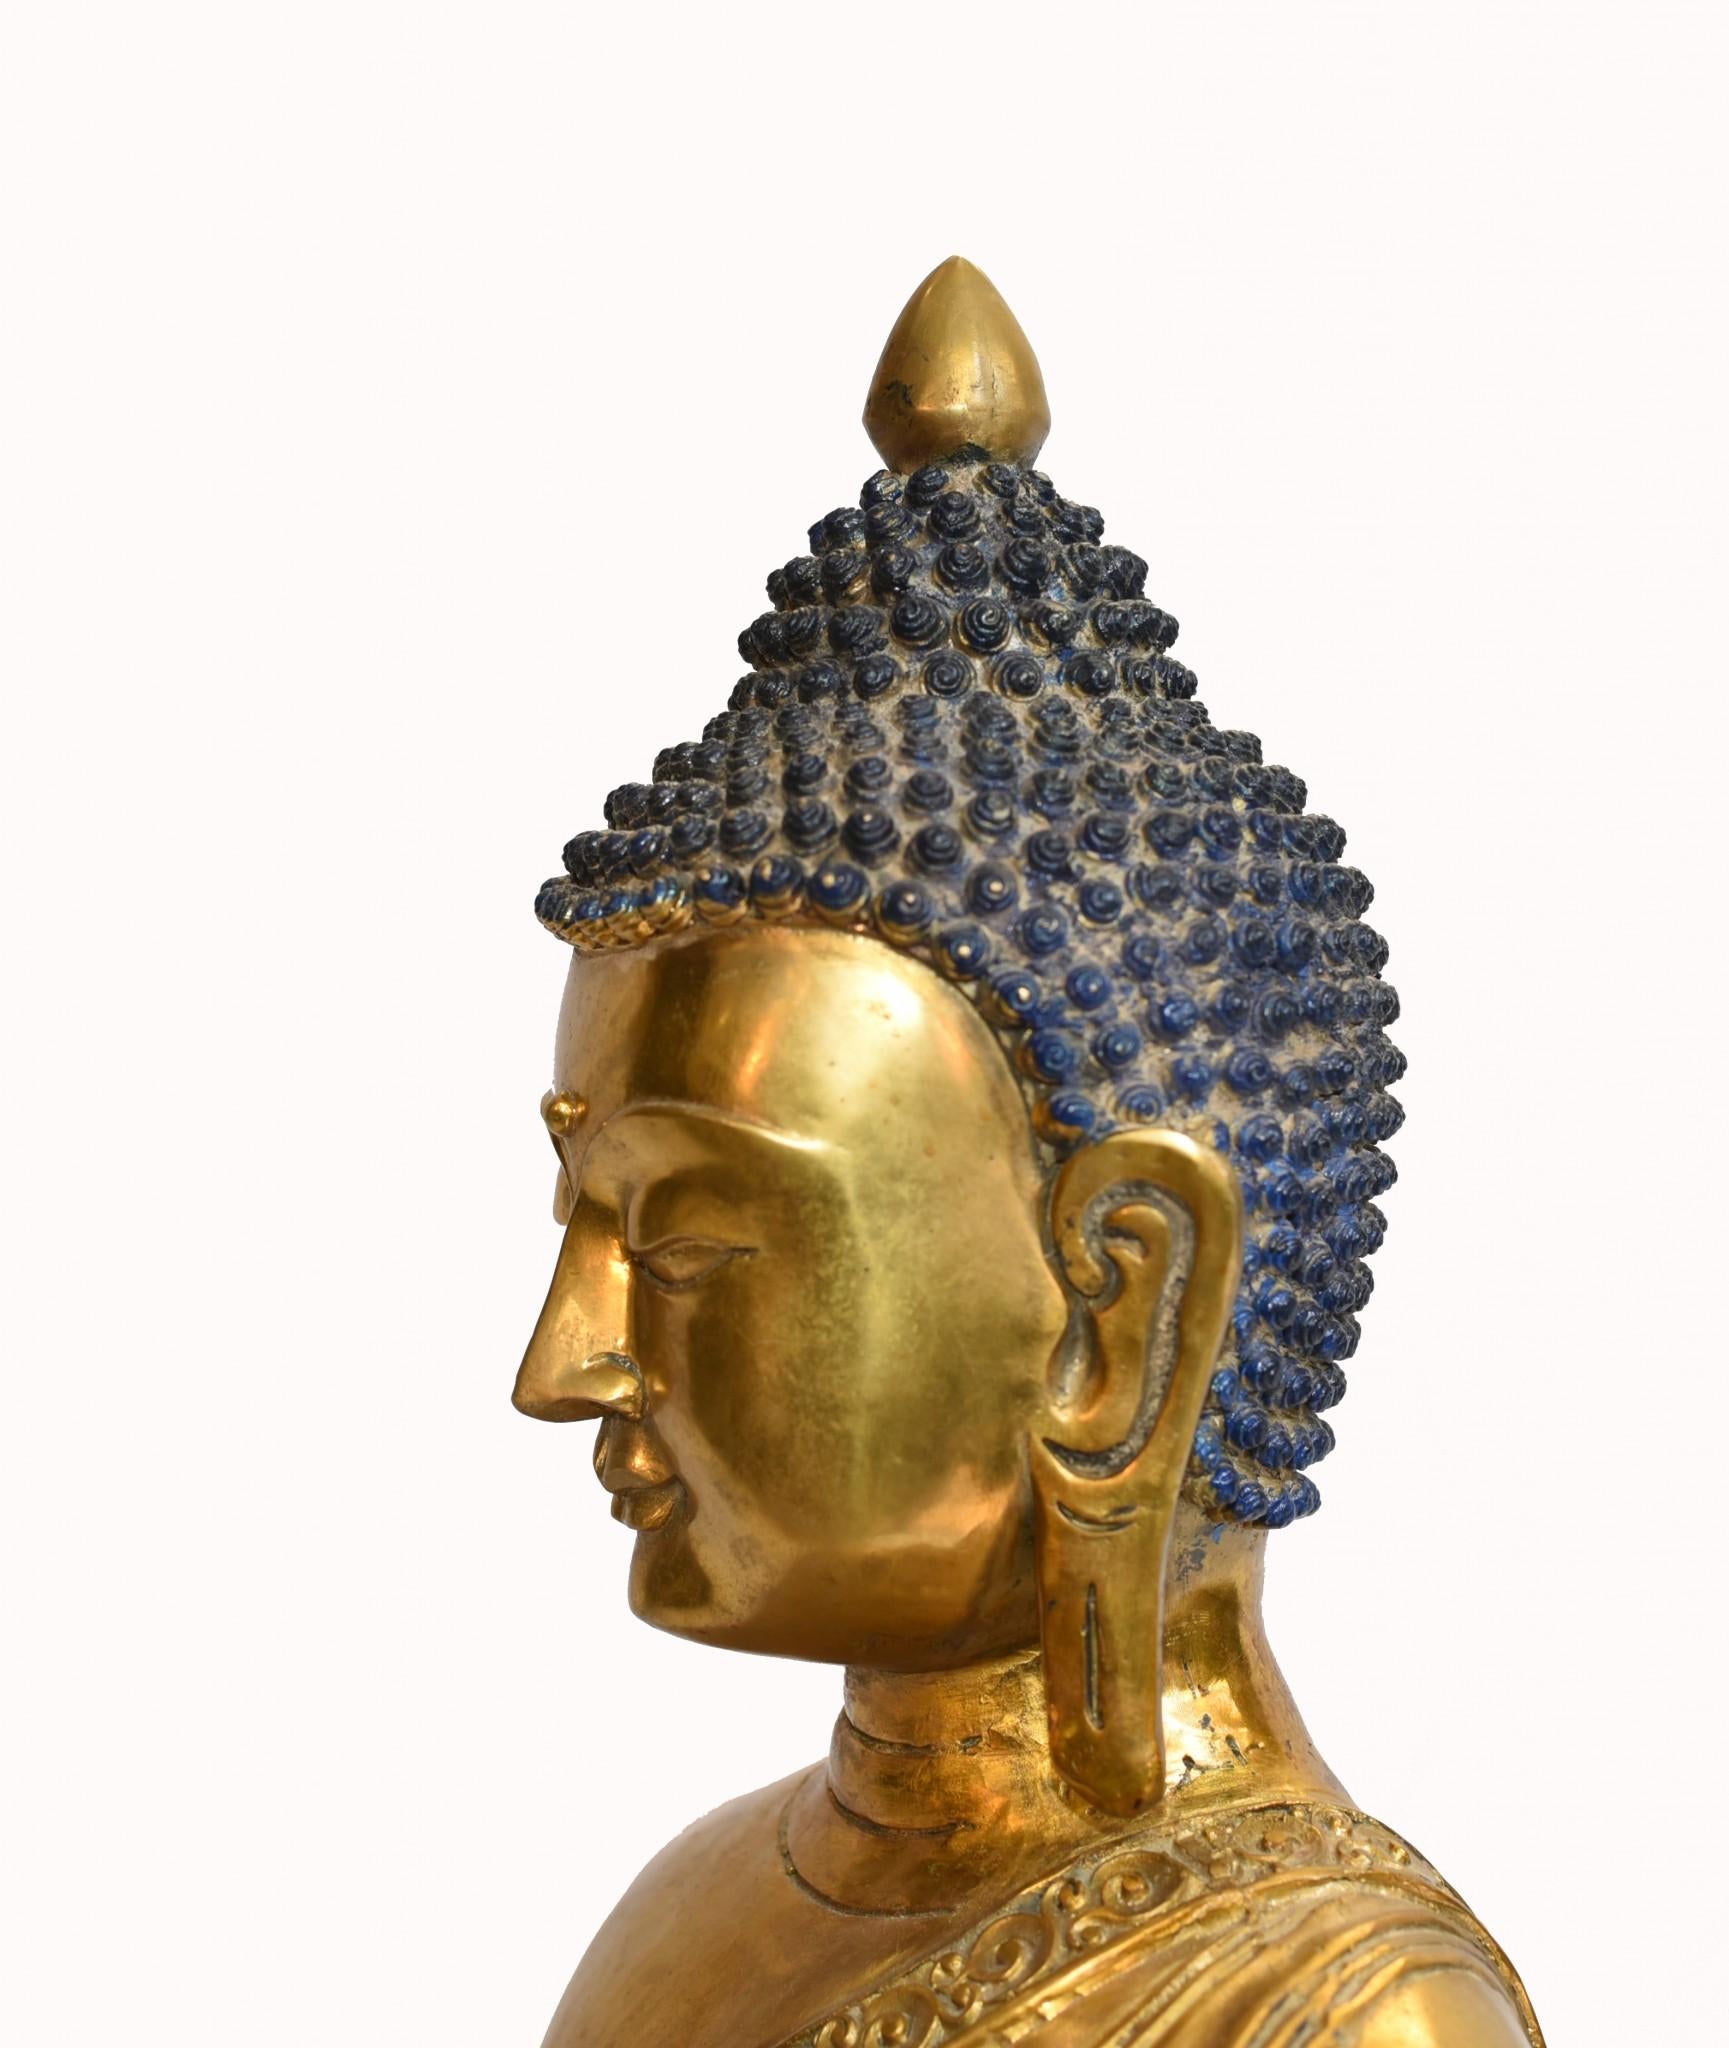 Glorious bronze seated Buddha statue
Nepalese Buddha is in seated meditation pose
Of course being bronze this can live outside with no fear of rusting
Add light and serenity to any room or exterior, great for a meditation or yoga space
Viewings